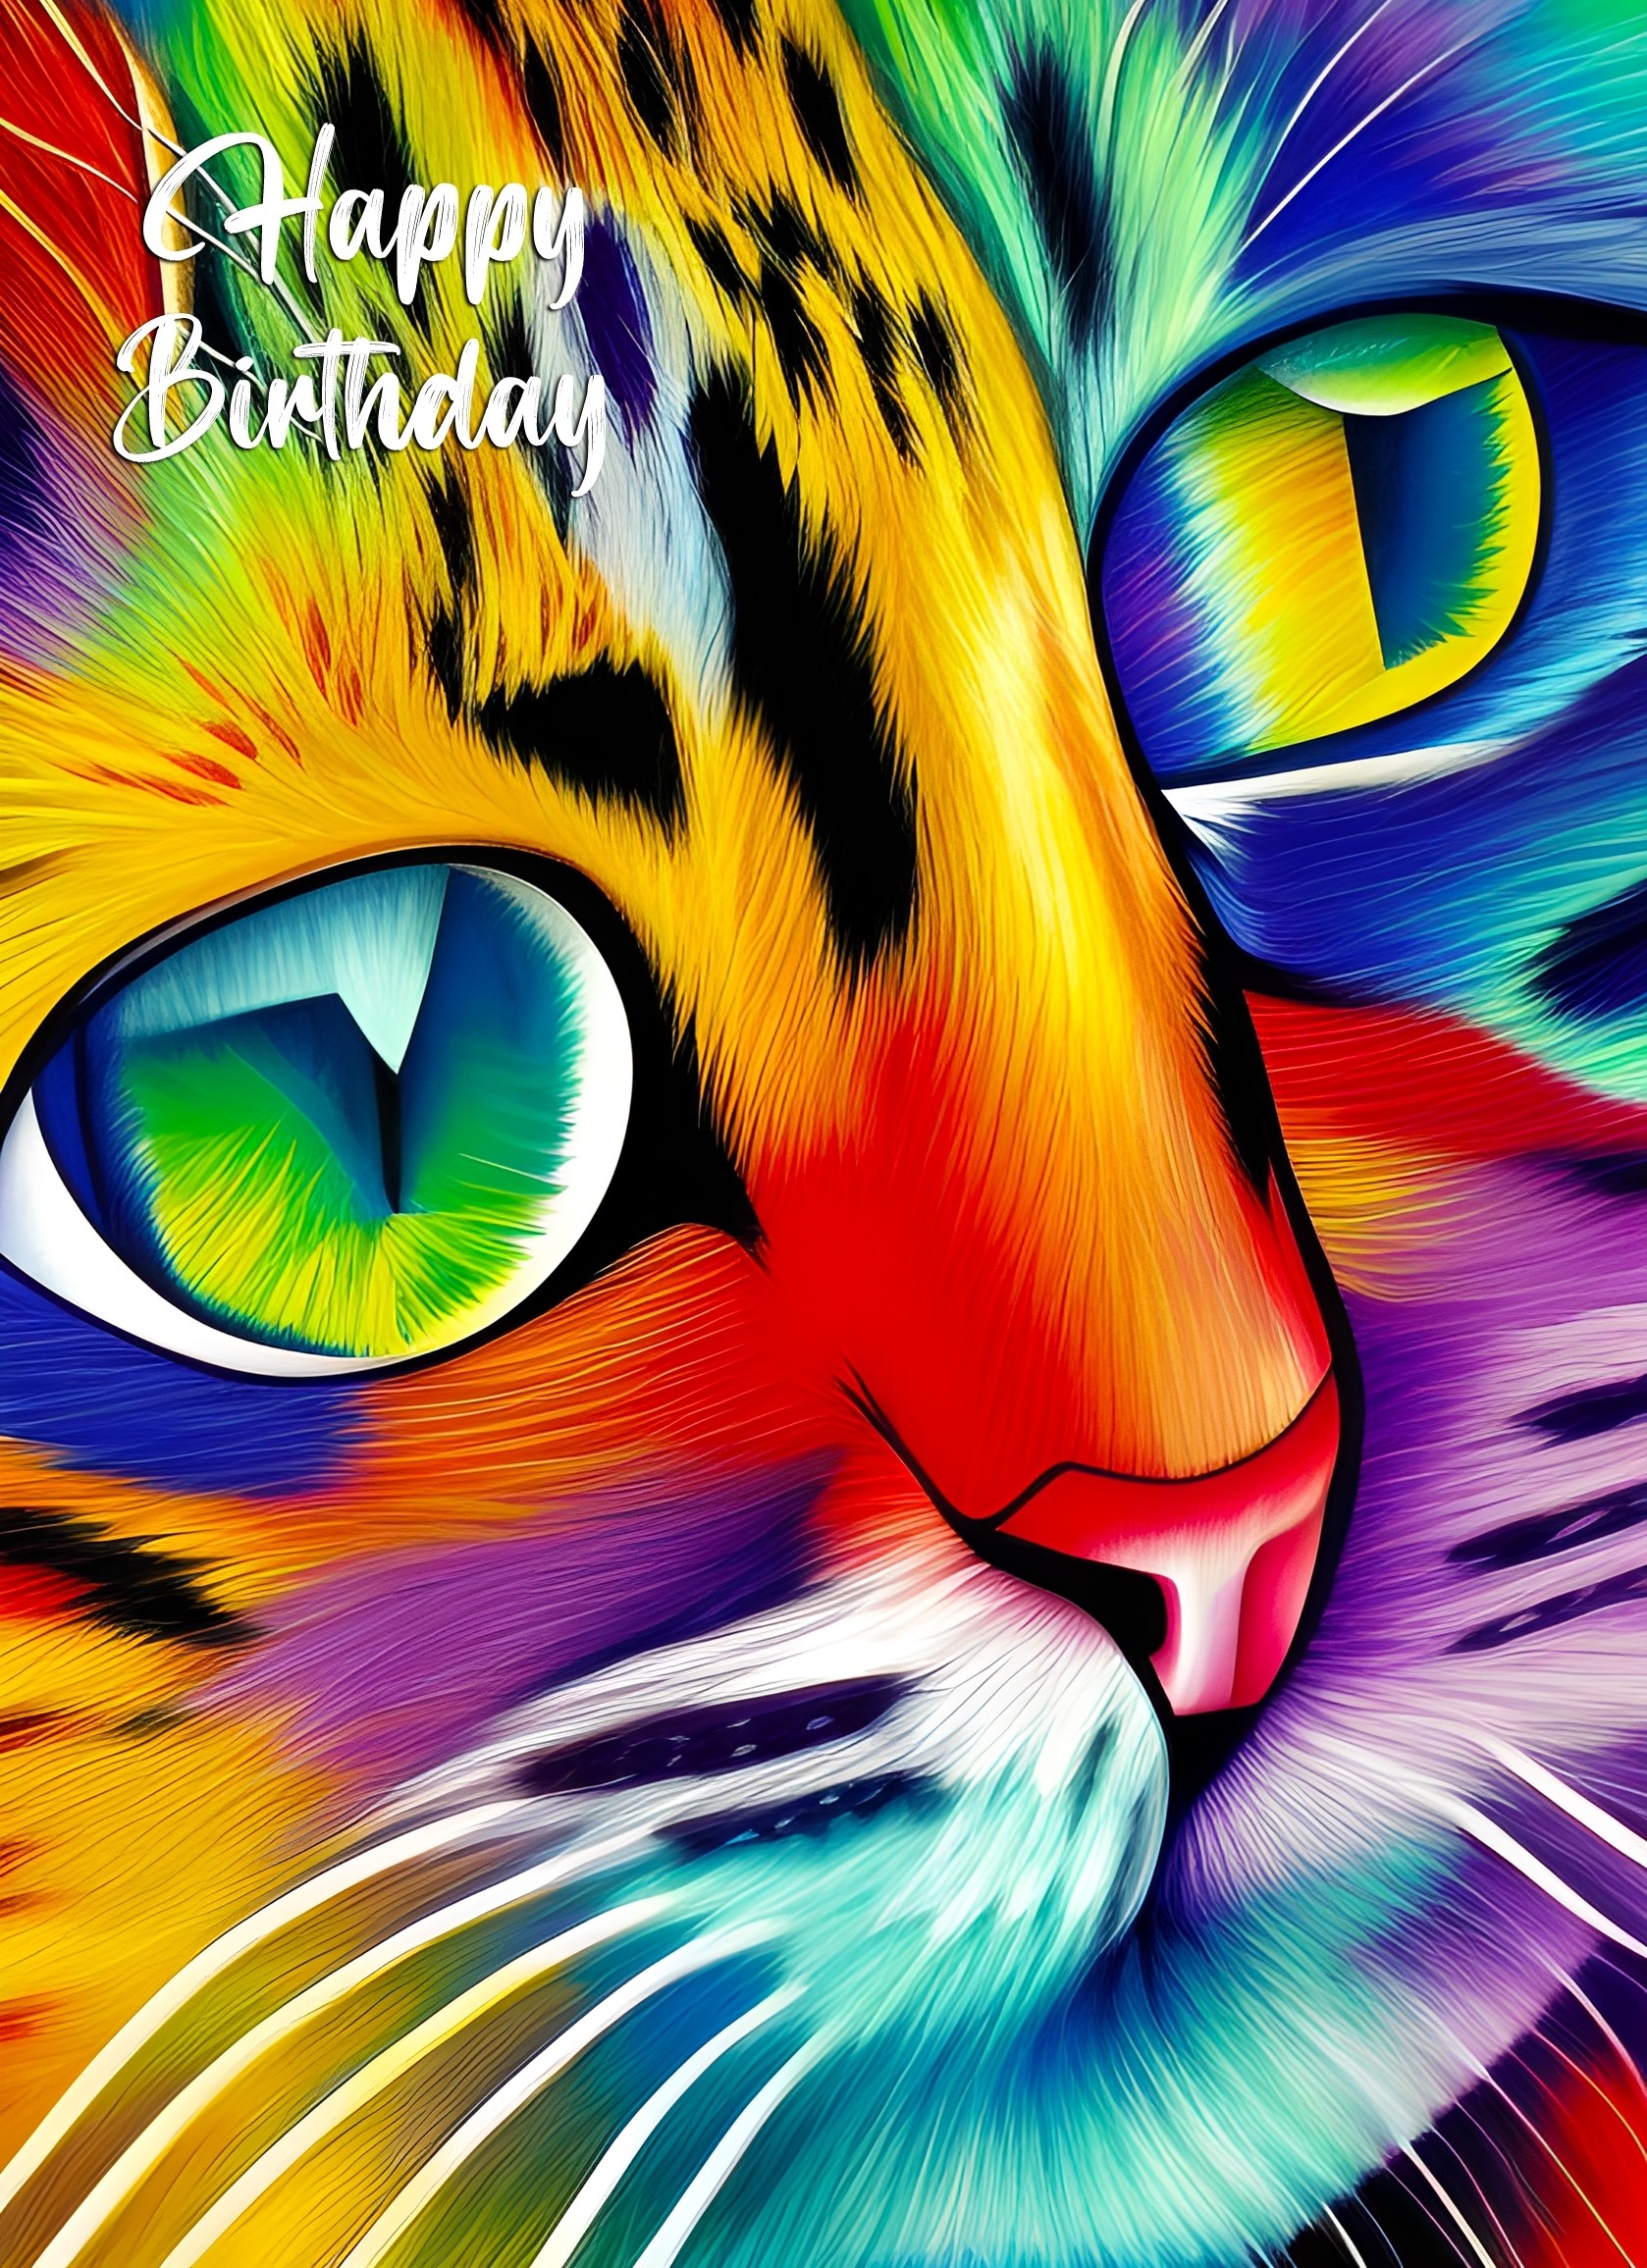 Cat Animal Colourful Abstract Art Birthday Card